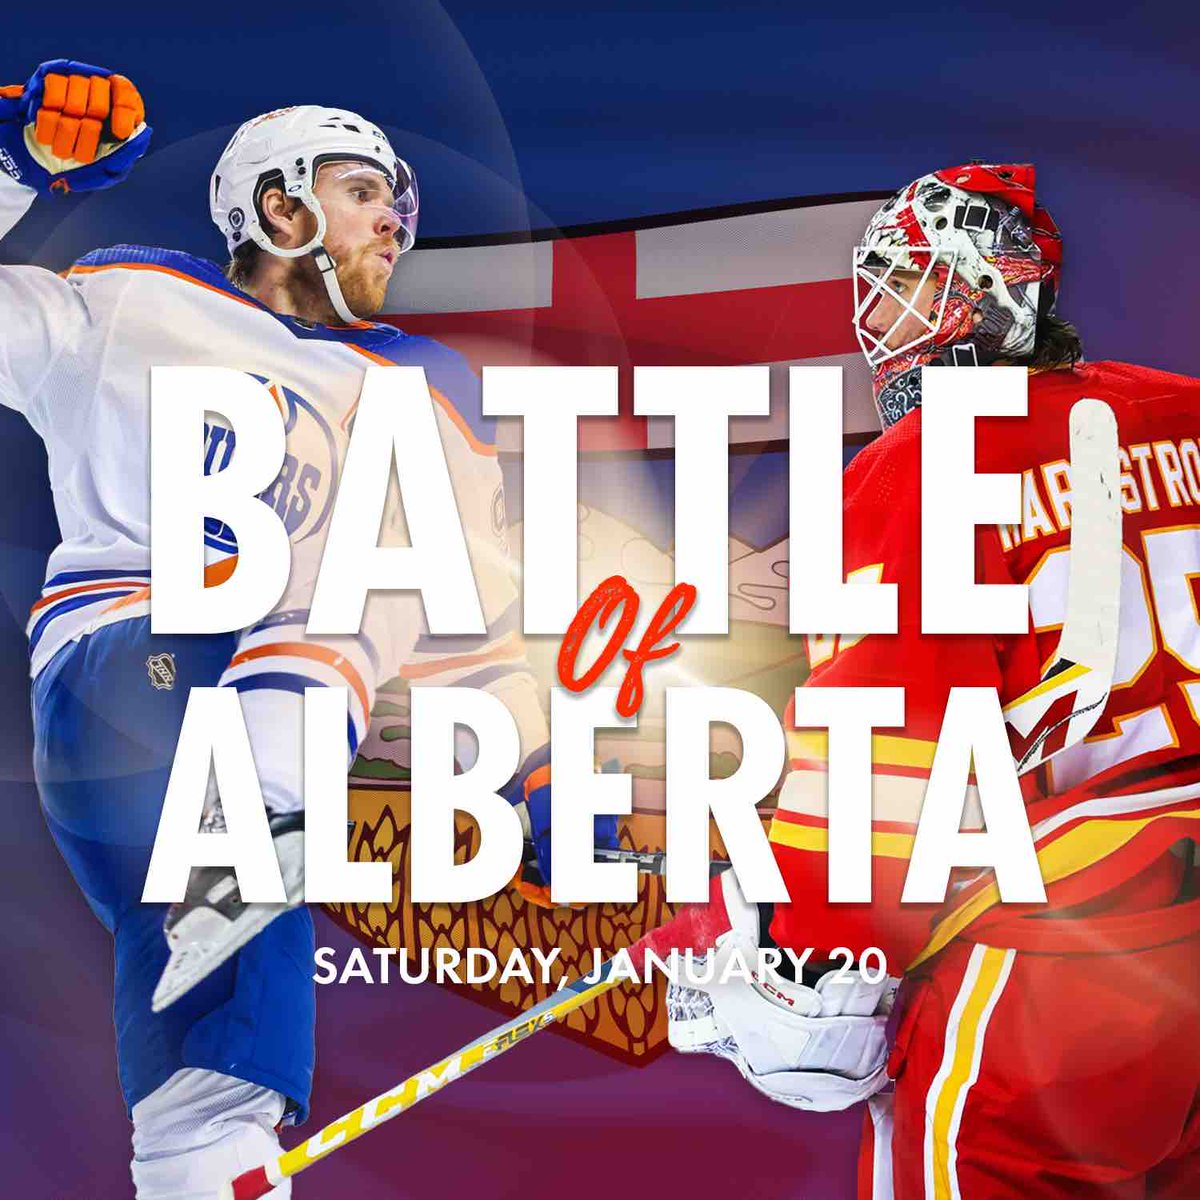 Tonight, the Oilers and Flames will face off in the battle of Alberta! 🏒 🥅 Who are you going to cheer for?